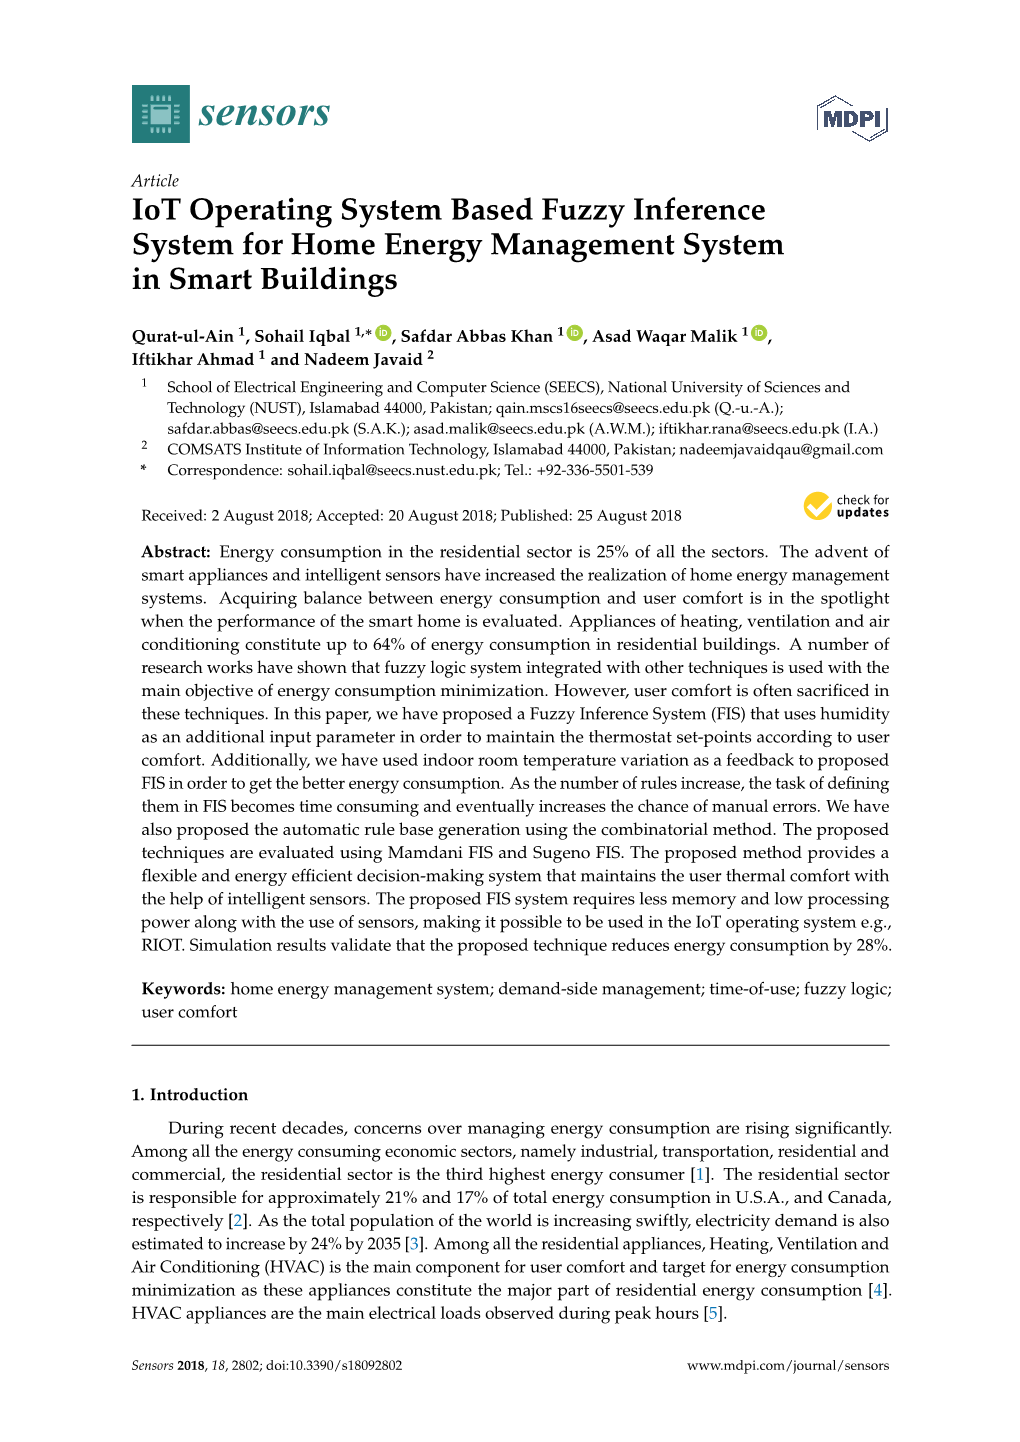 Iot Operating System Based Fuzzy Inference System for Home Energy Management System in Smart Buildings